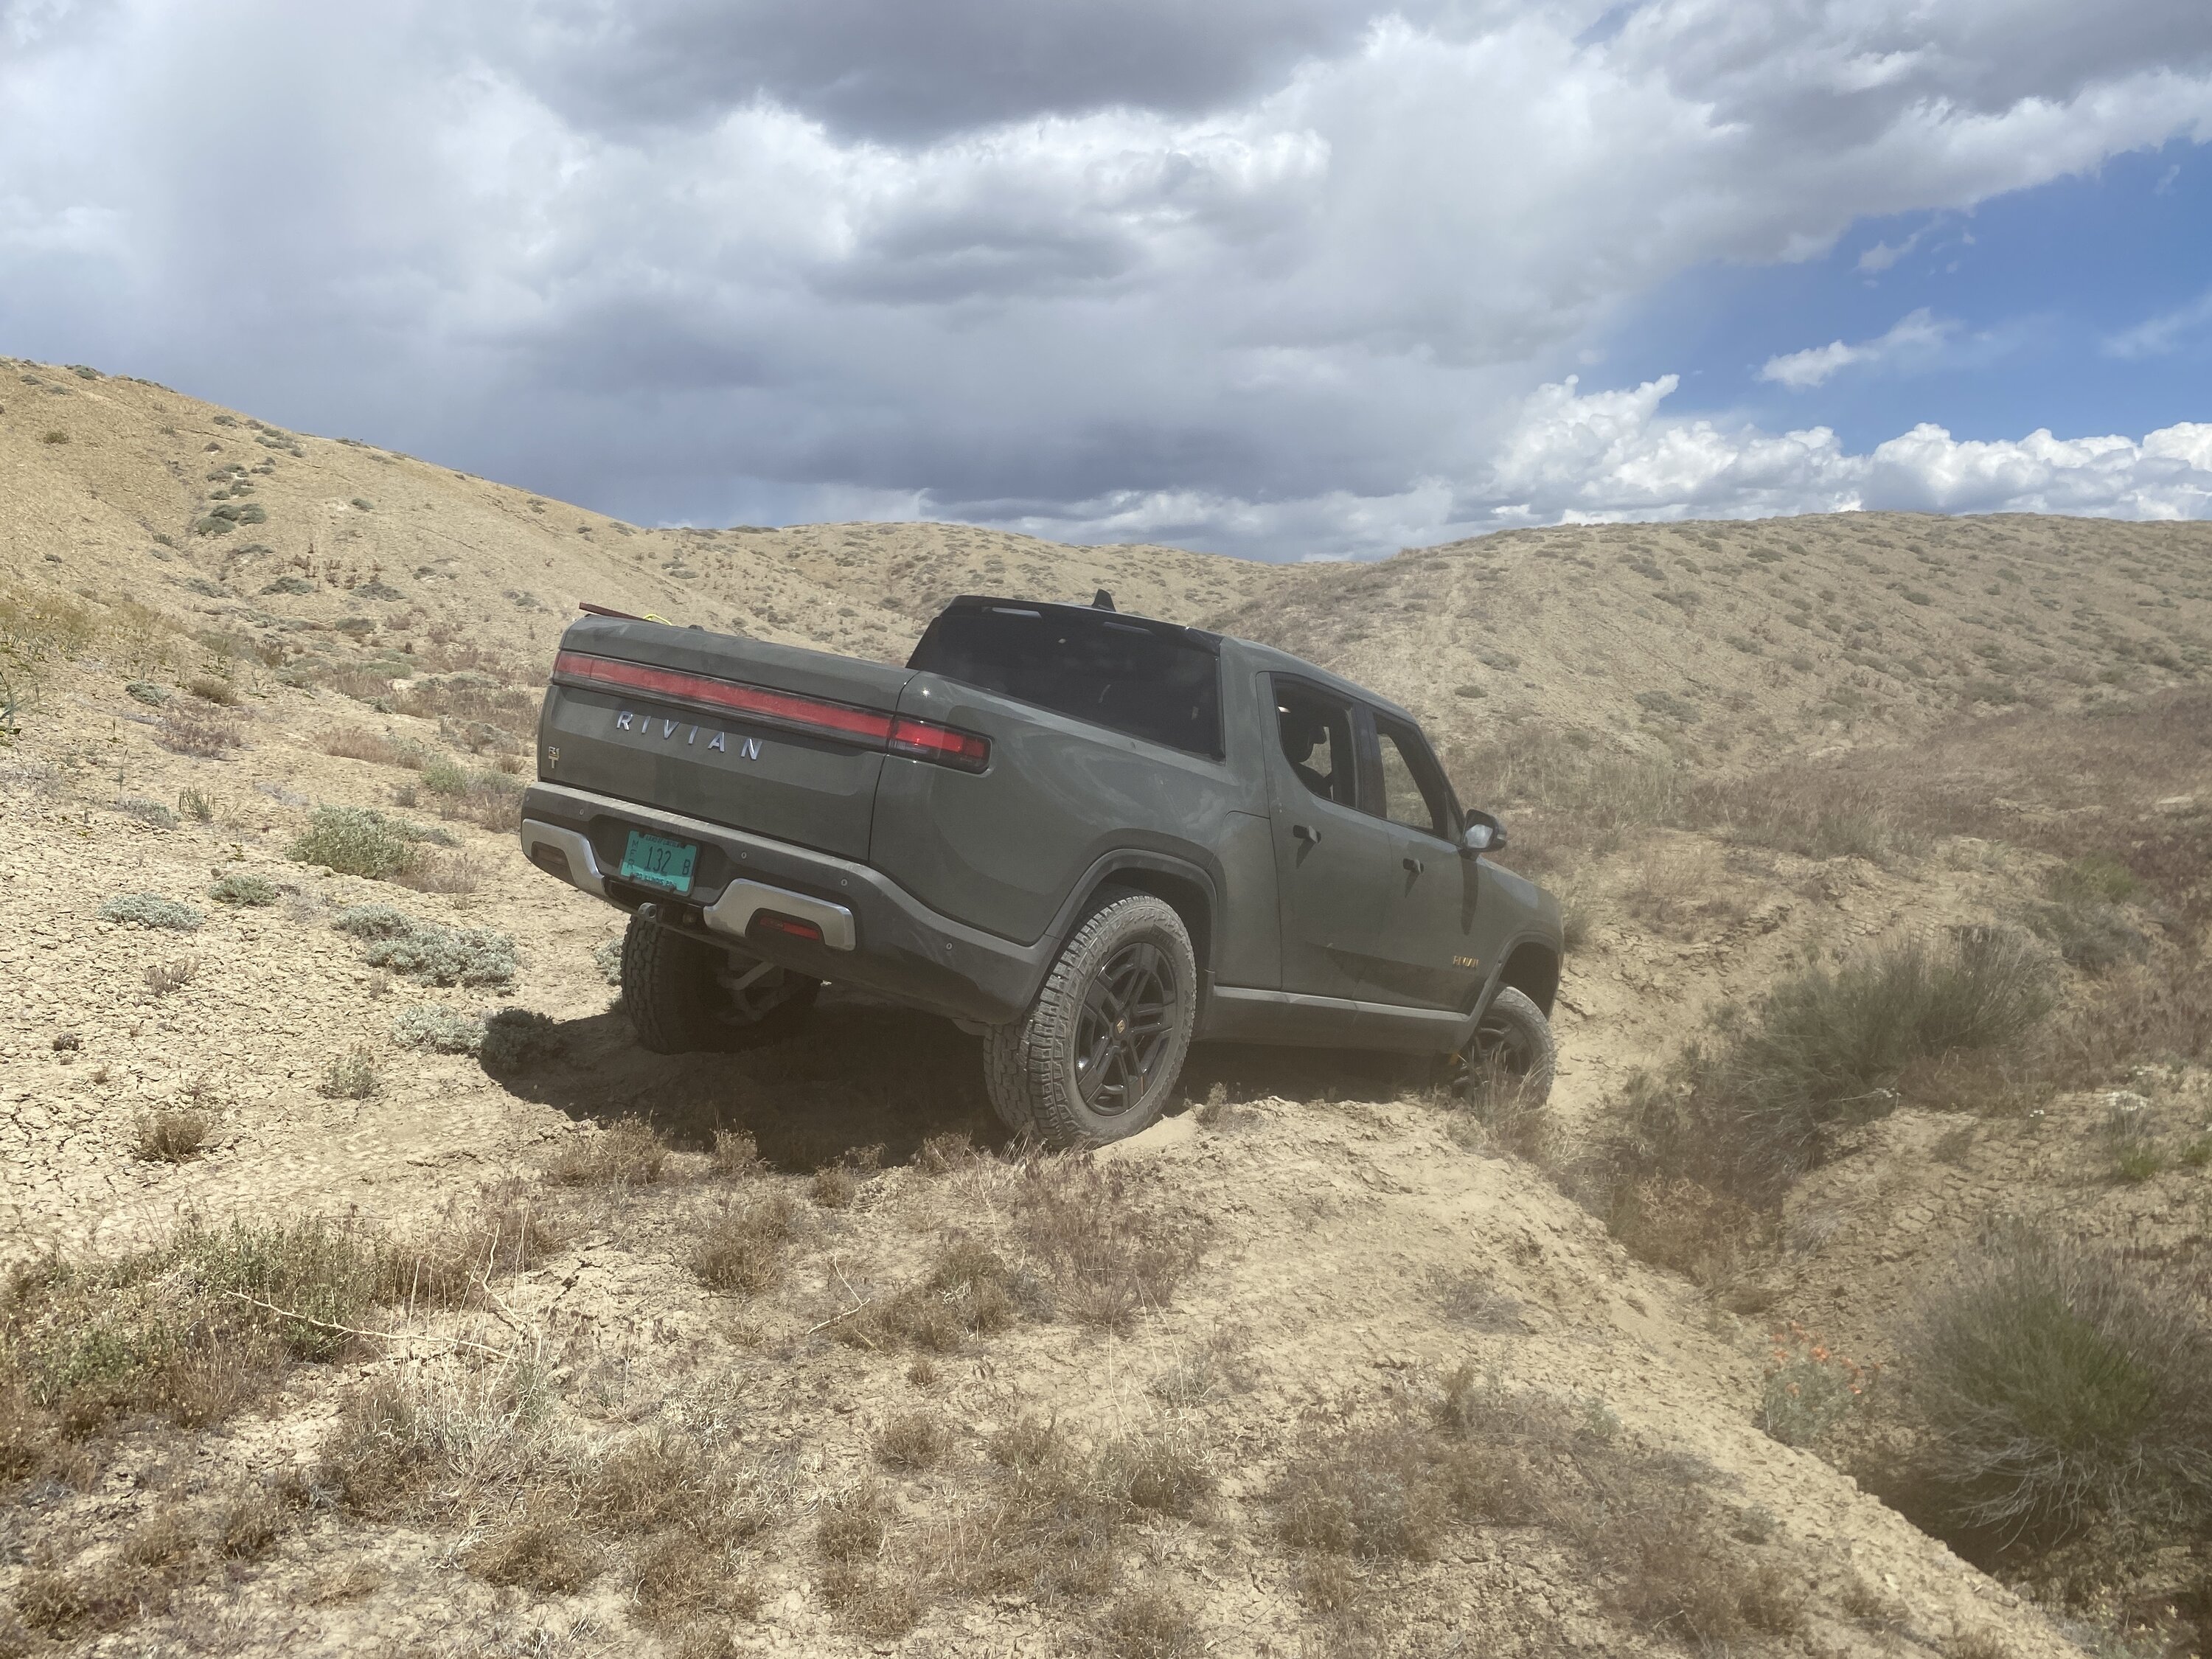 Rivian R1T R1S How Much it Cost to Drive a Rivian 3,000 Miles Compared to a Midsize Gas Pickup Truck Cents Per Mile 20220524_203531090_iOS